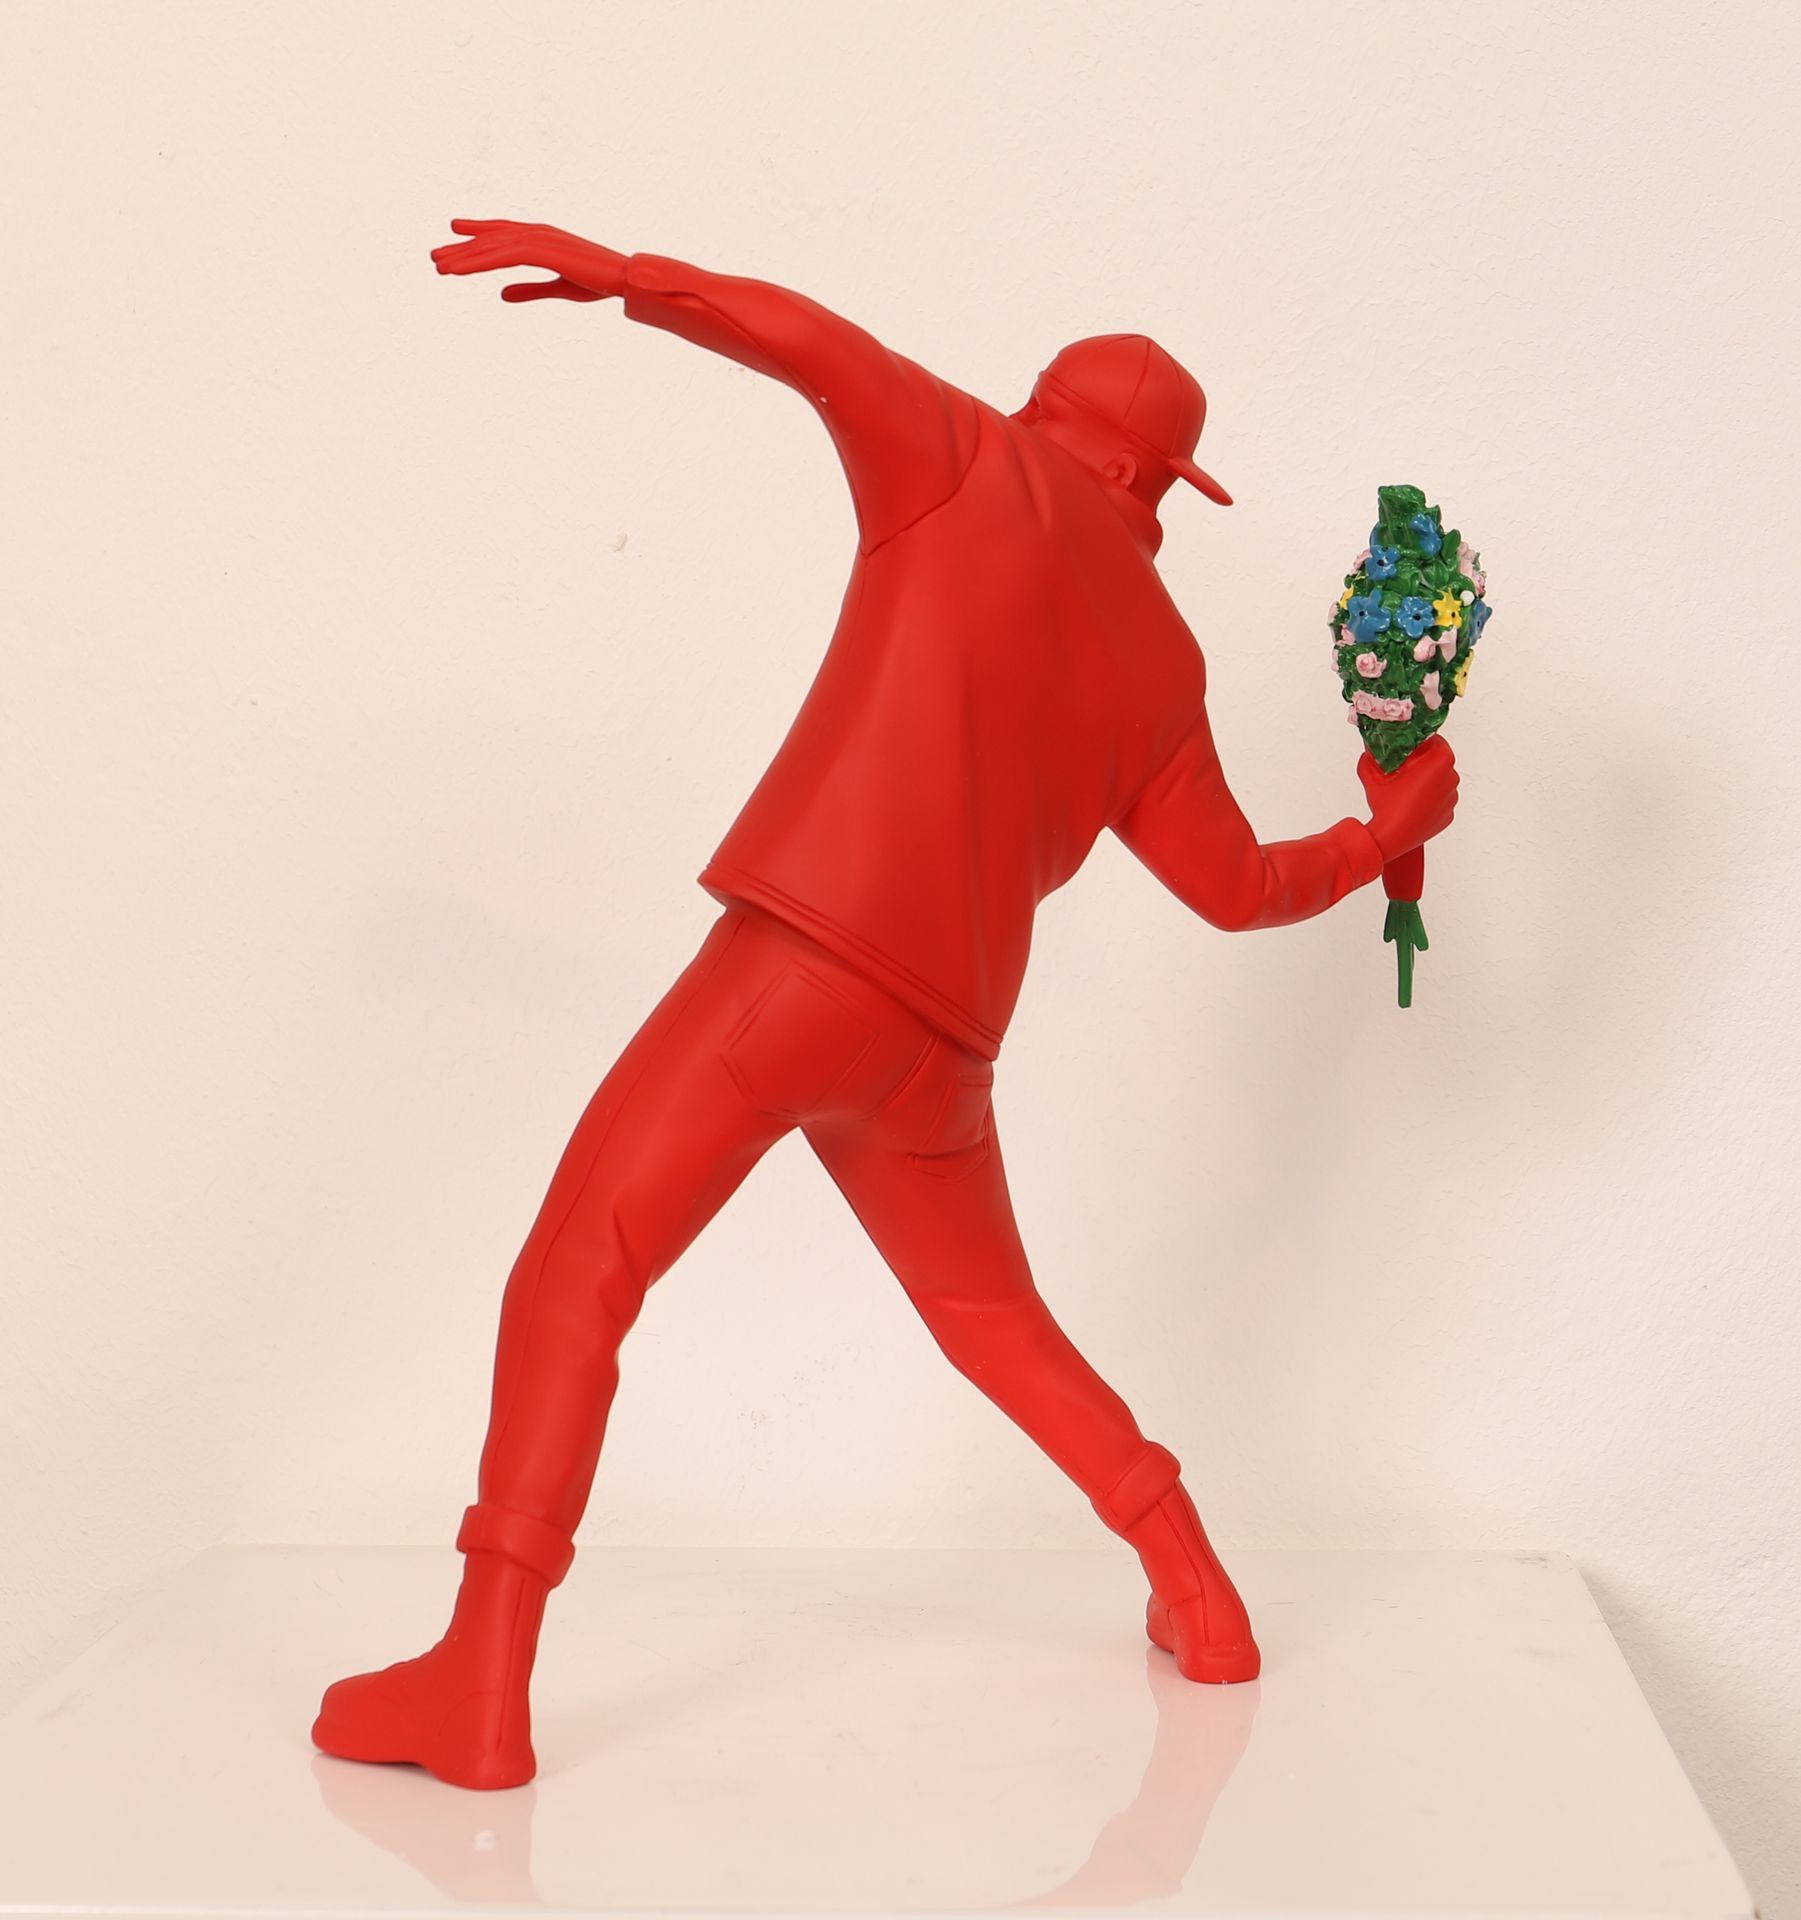 Null Banksy (from) - Figurine "Flower Bomber" reproduction in resin. Red model.
&hellip;